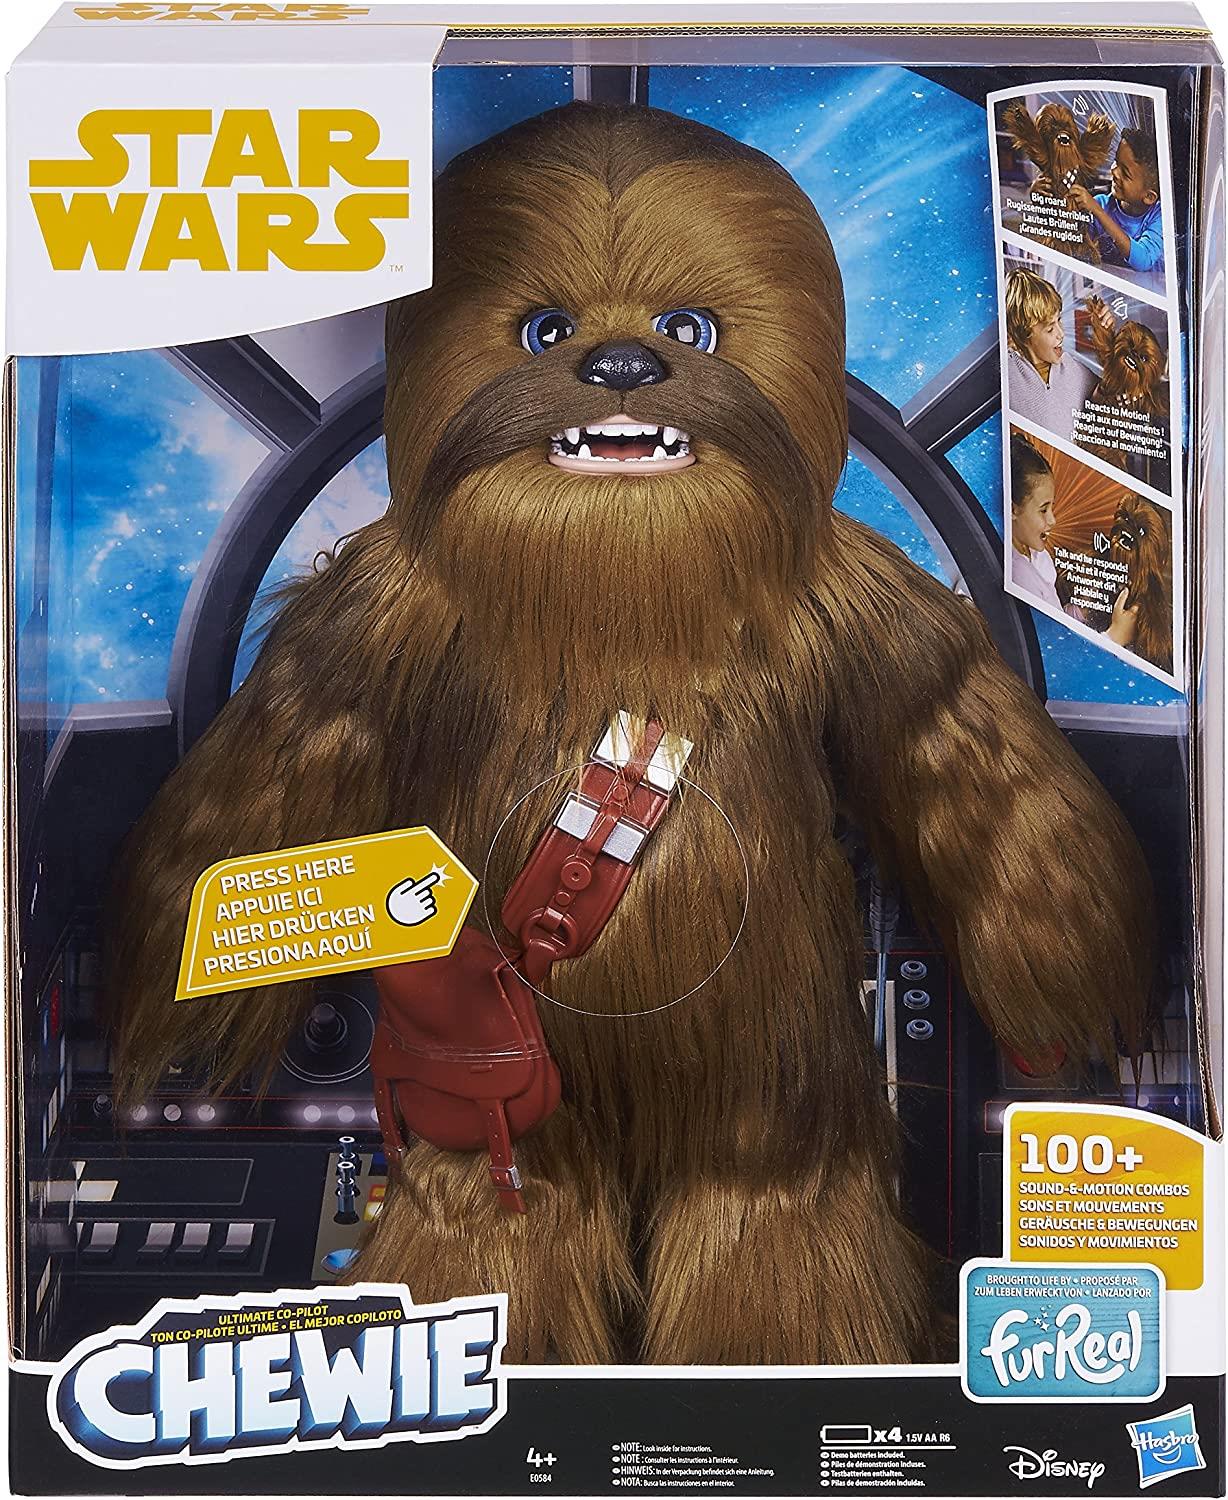 Star Wars Galactic Heroes Ultimate Co-pilot Chewie by Star Wars - UKBuyZone